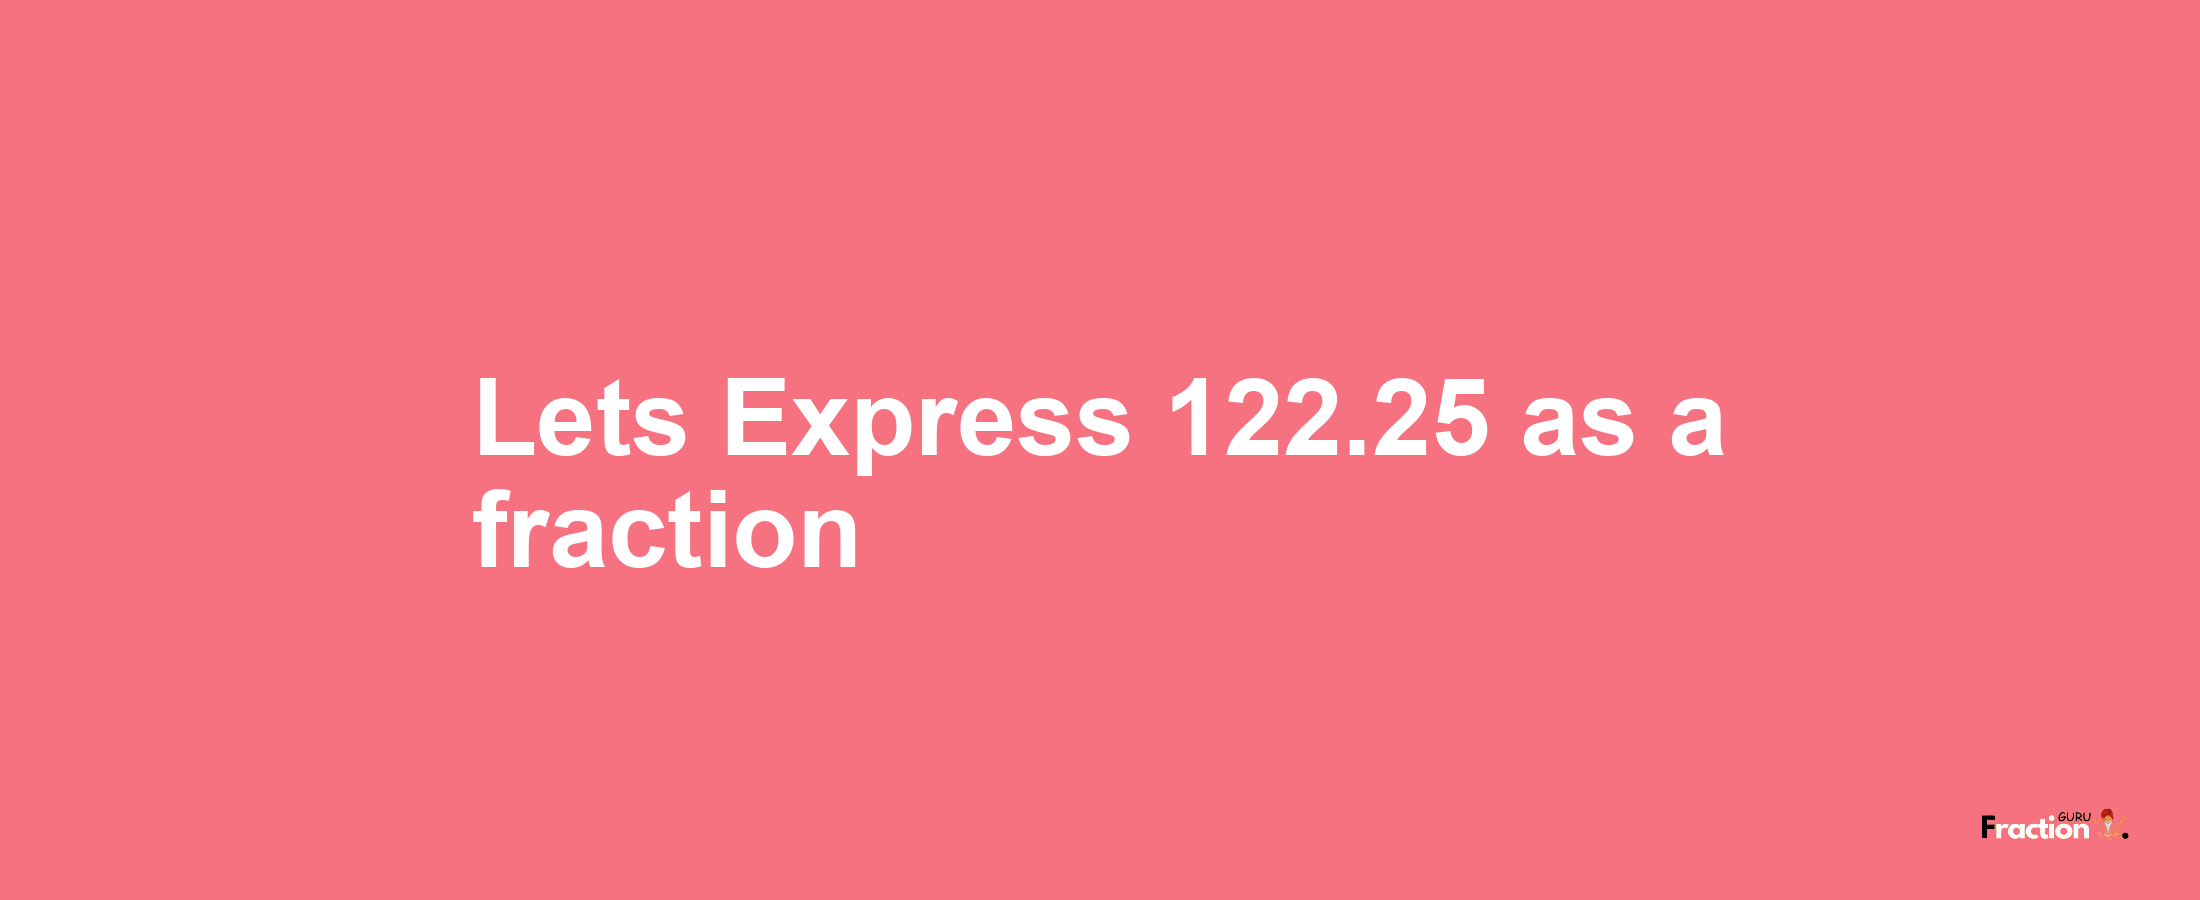 Lets Express 122.25 as afraction